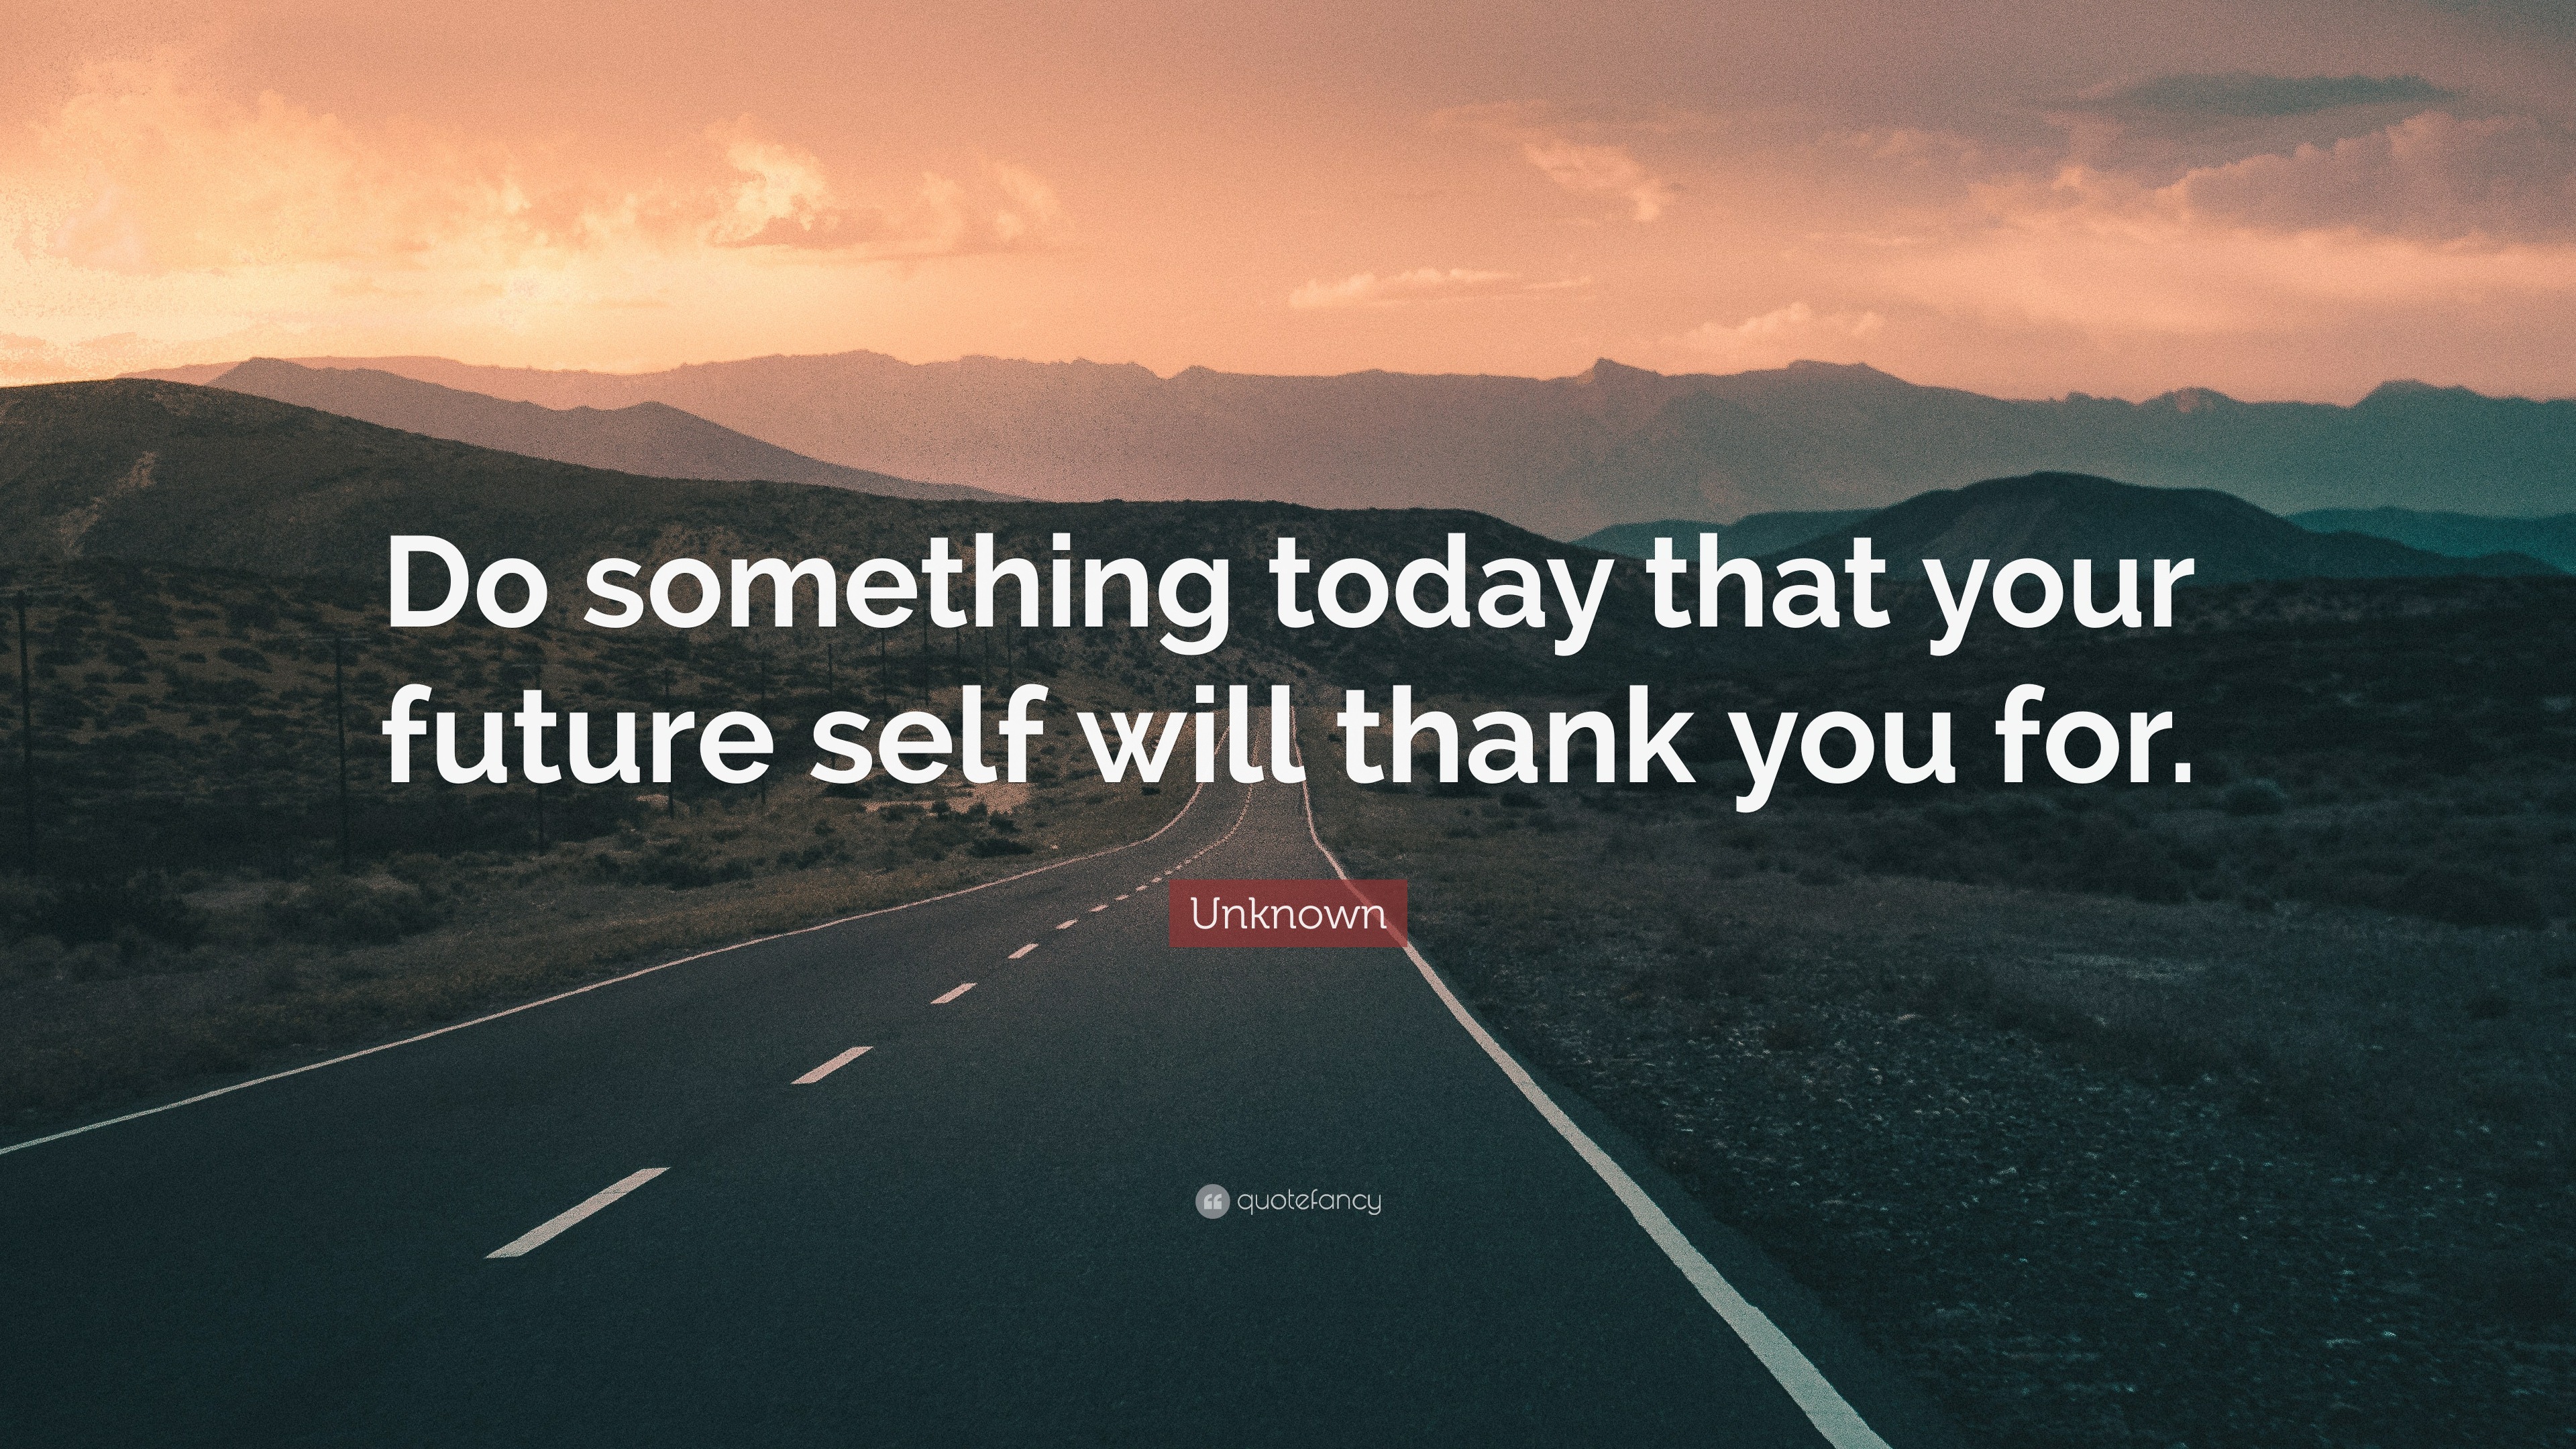 Quote Magnet Do something today that your future self will thank you for.